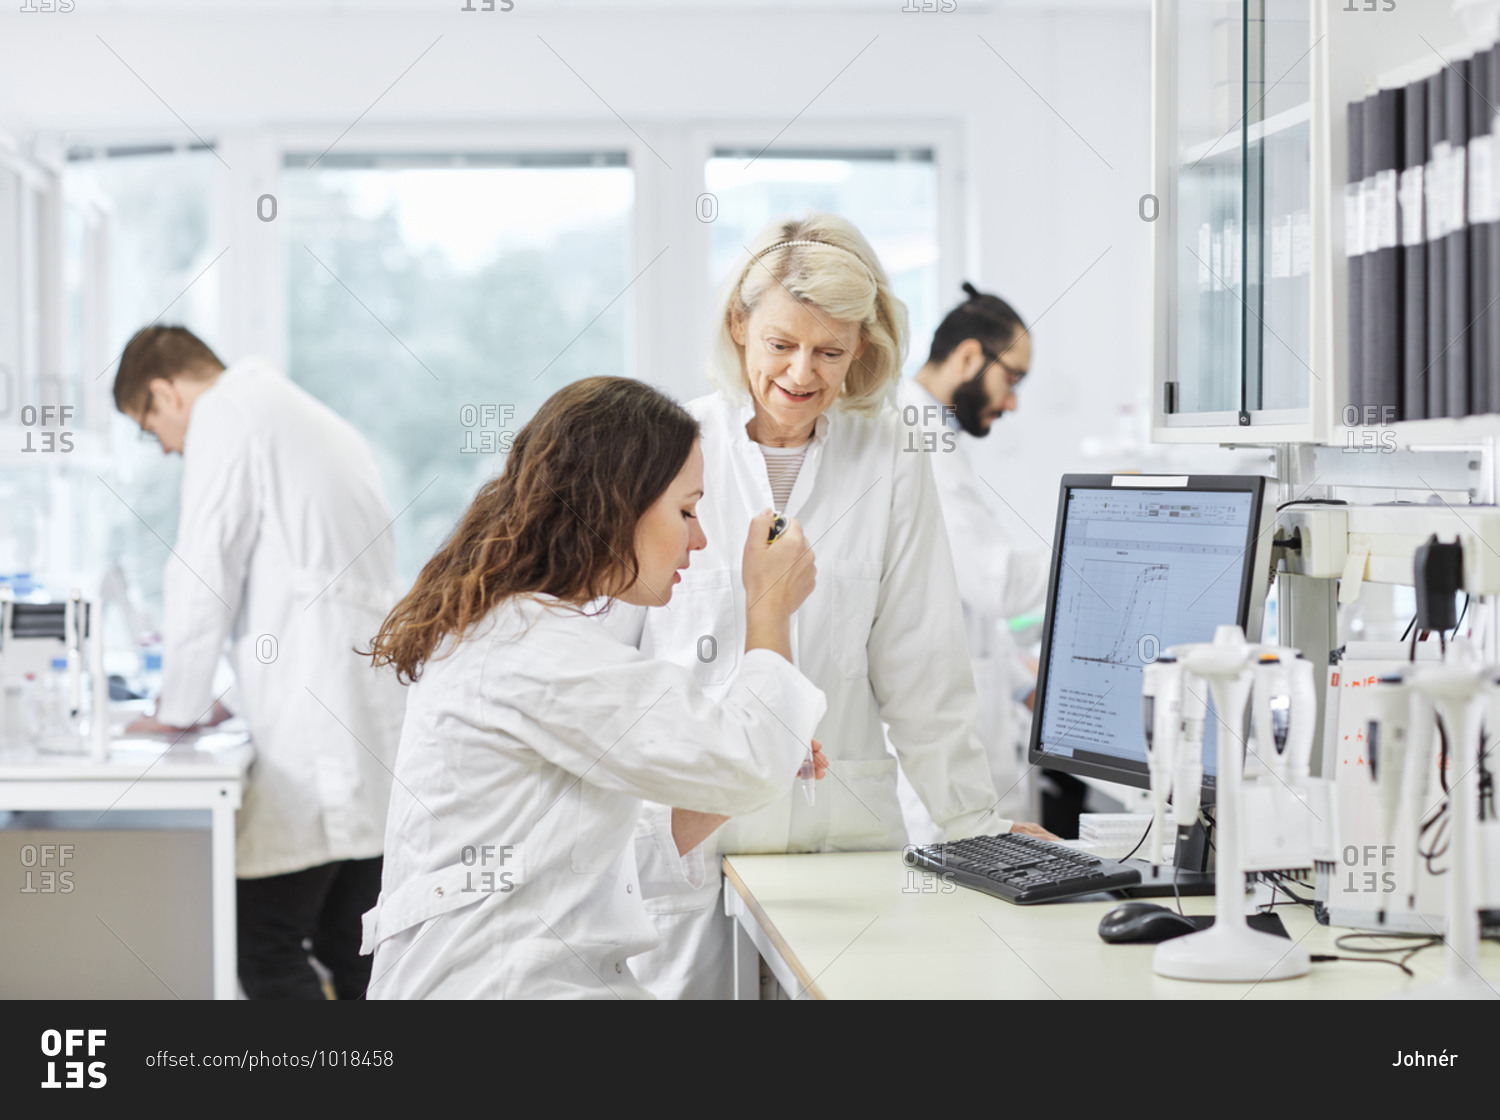 Woman working in a laboratory